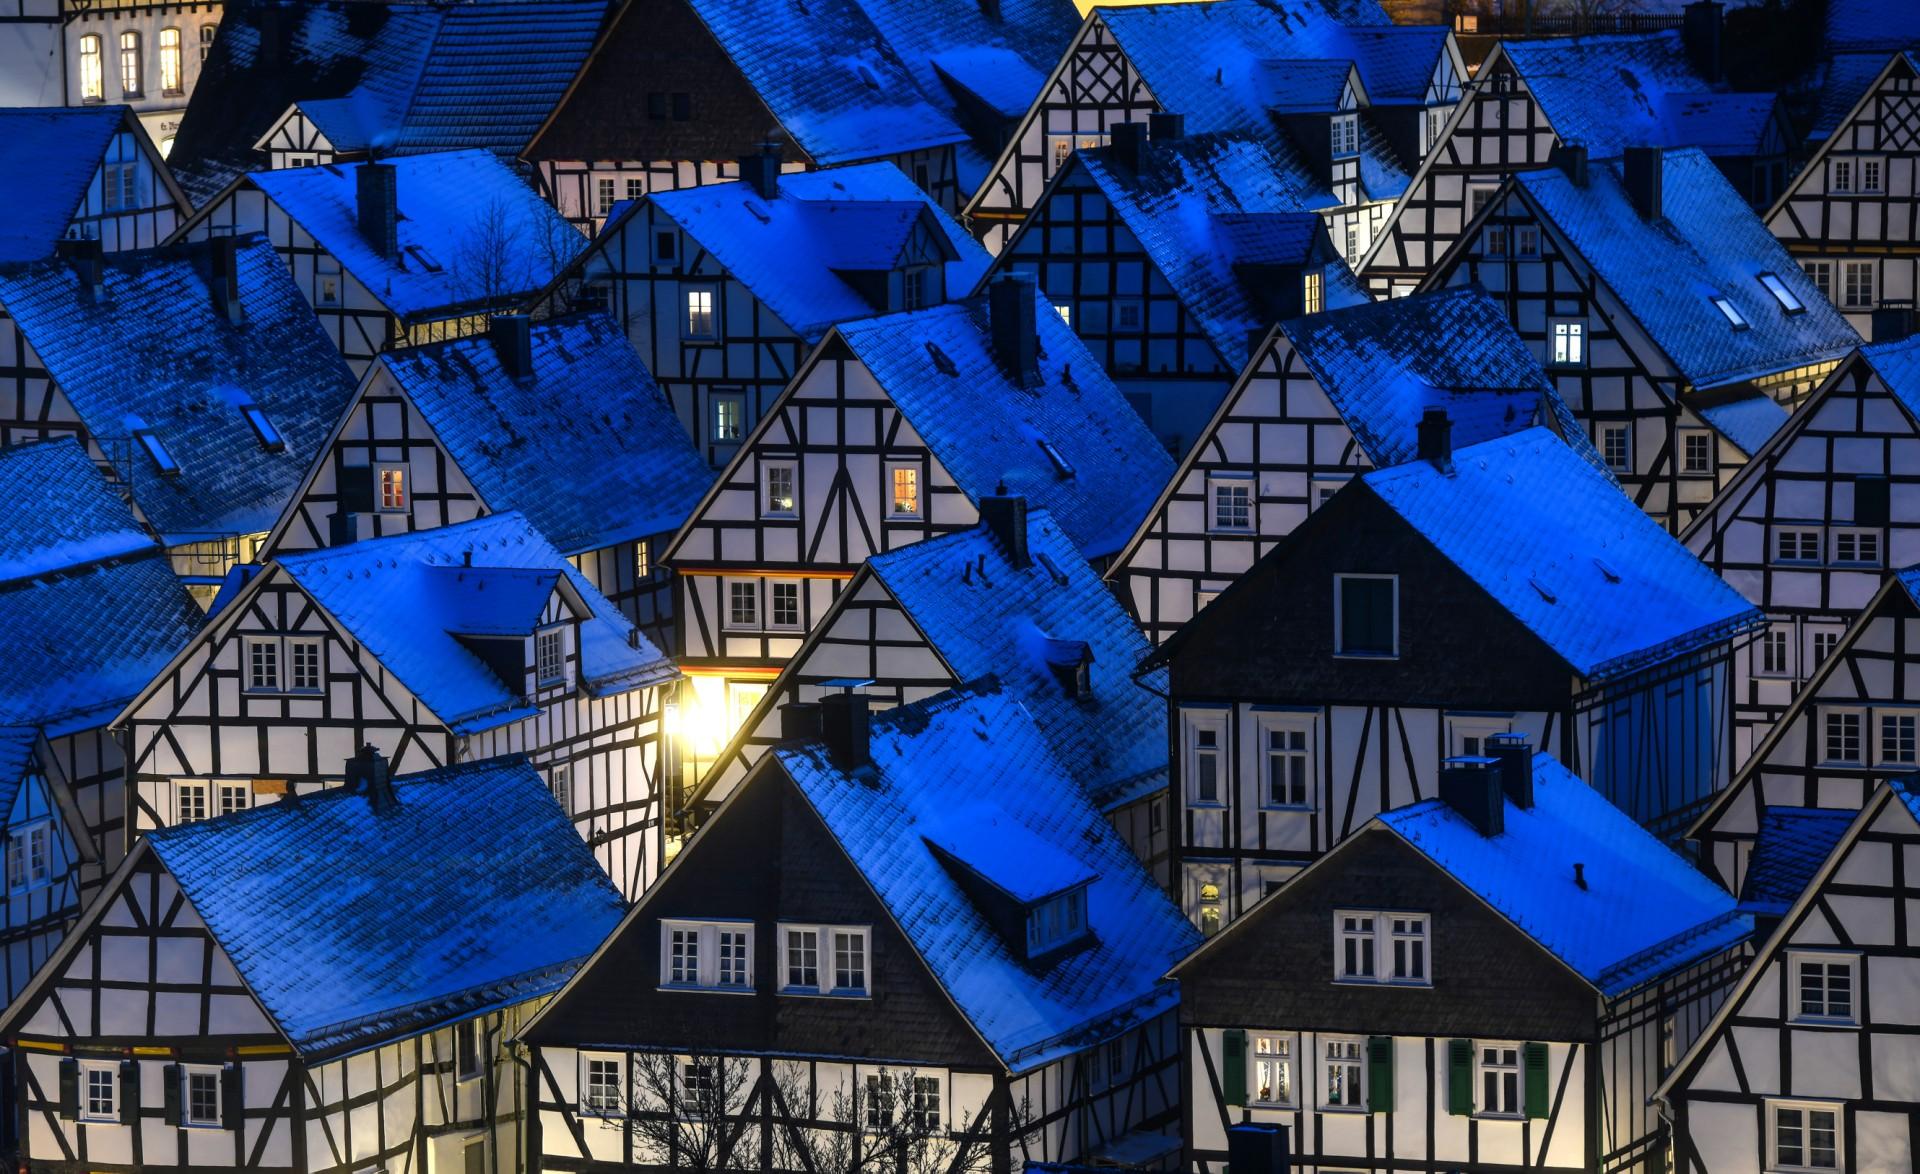 A view of the architectural monument 'Alter Flecken' with 80 half-timbered houses in the old town of Freudenberg, western Germany on Feb 13. Germany recently managed to slow a fierce fourth wave of the pandemic, in part by ramping up booster vaccinations and excluding the unvaccinated from large parts of public life. Photo: AFP